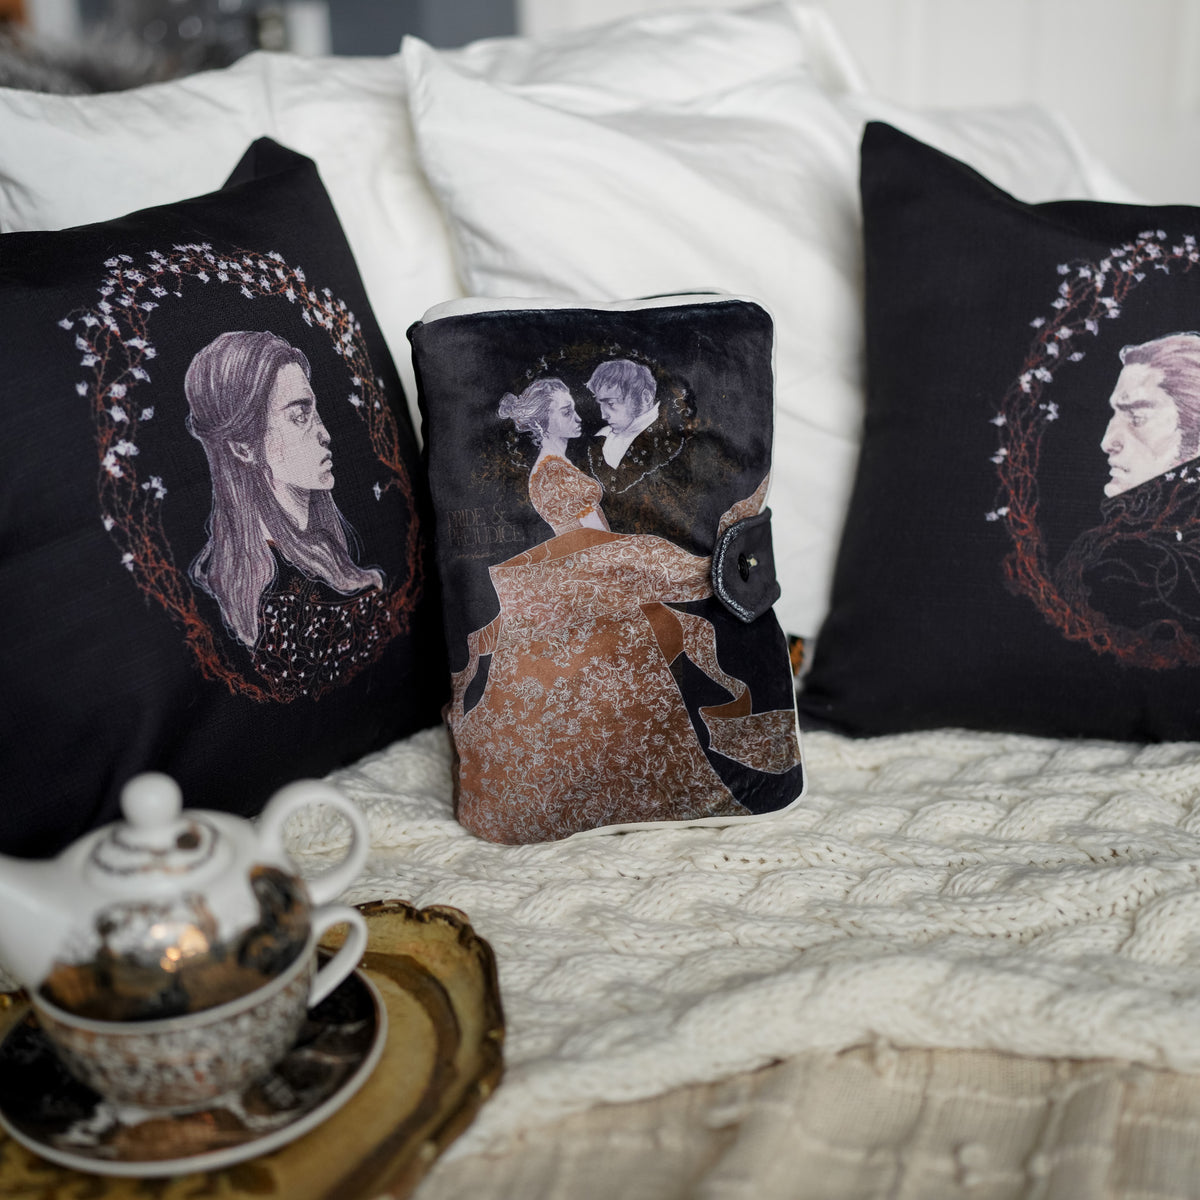 PILLOW - Pride and Prejudice Book Pillow from LitJoy Crate | Collectibles &amp; Gifts for Booklovers